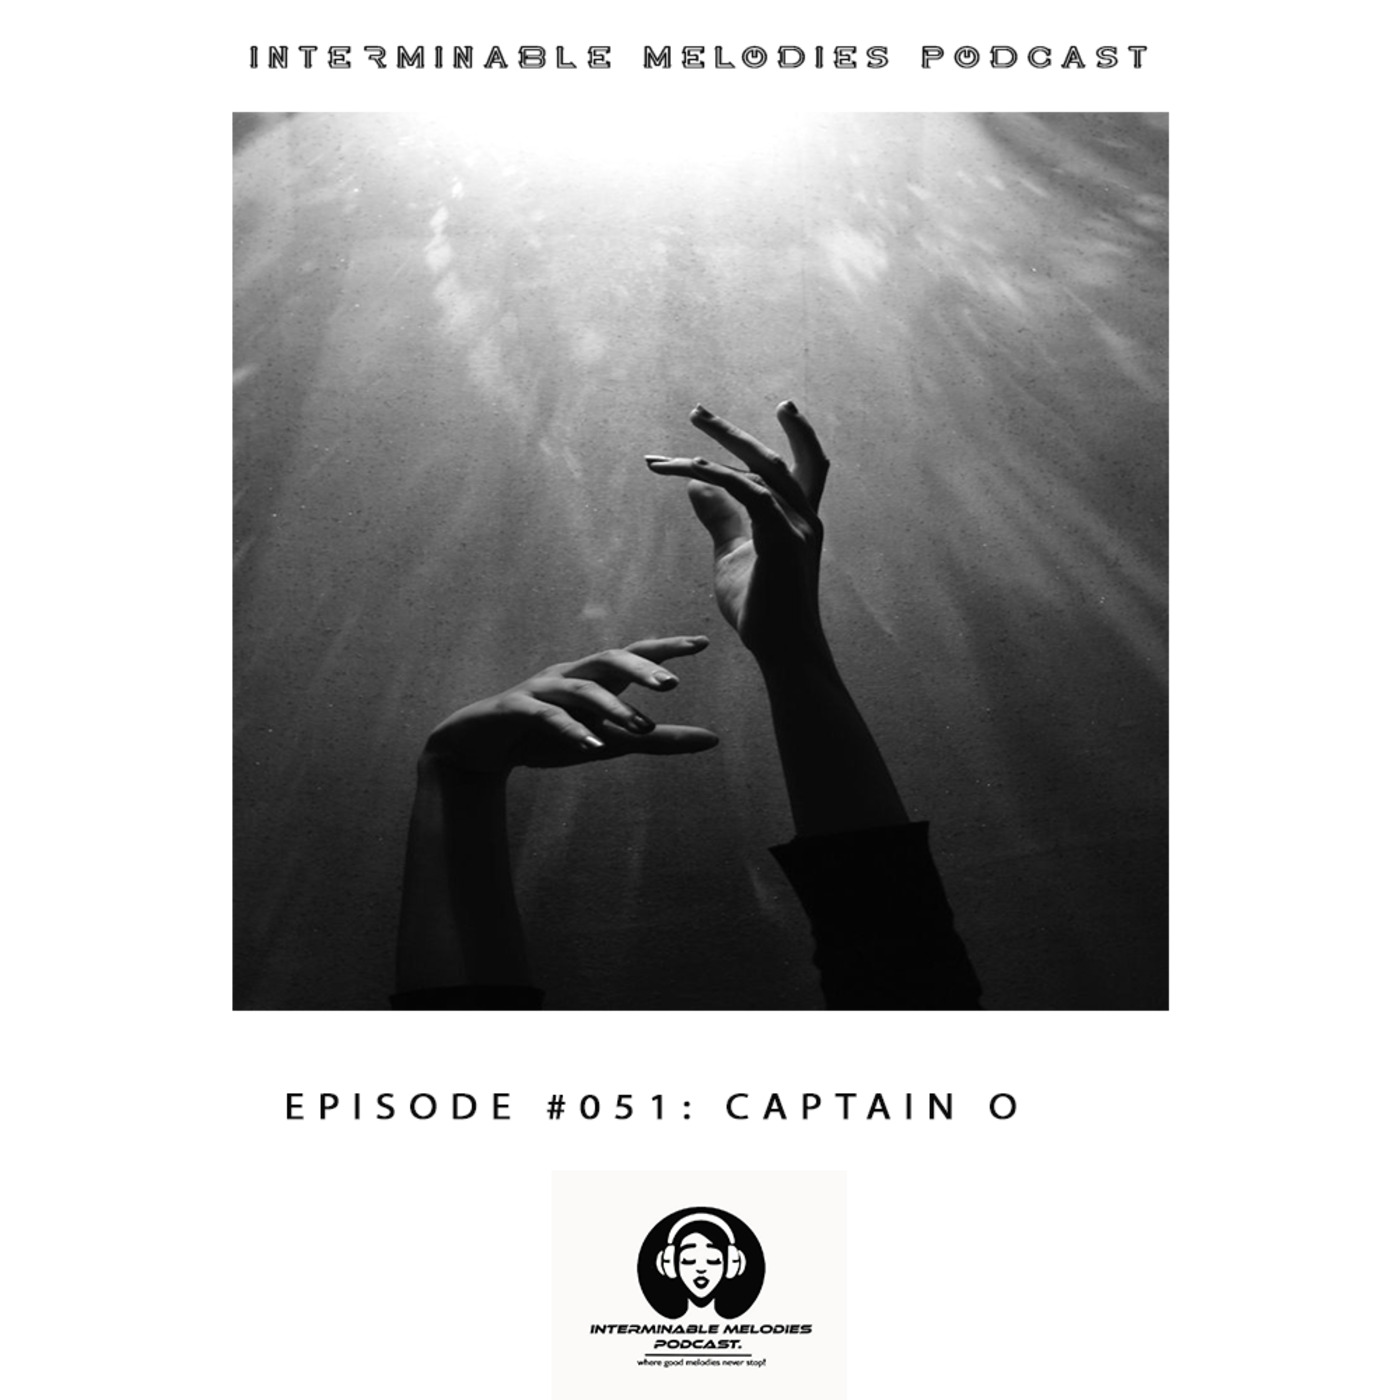 Interminable Melodies Podcast #051 Guest Mix by Captain O